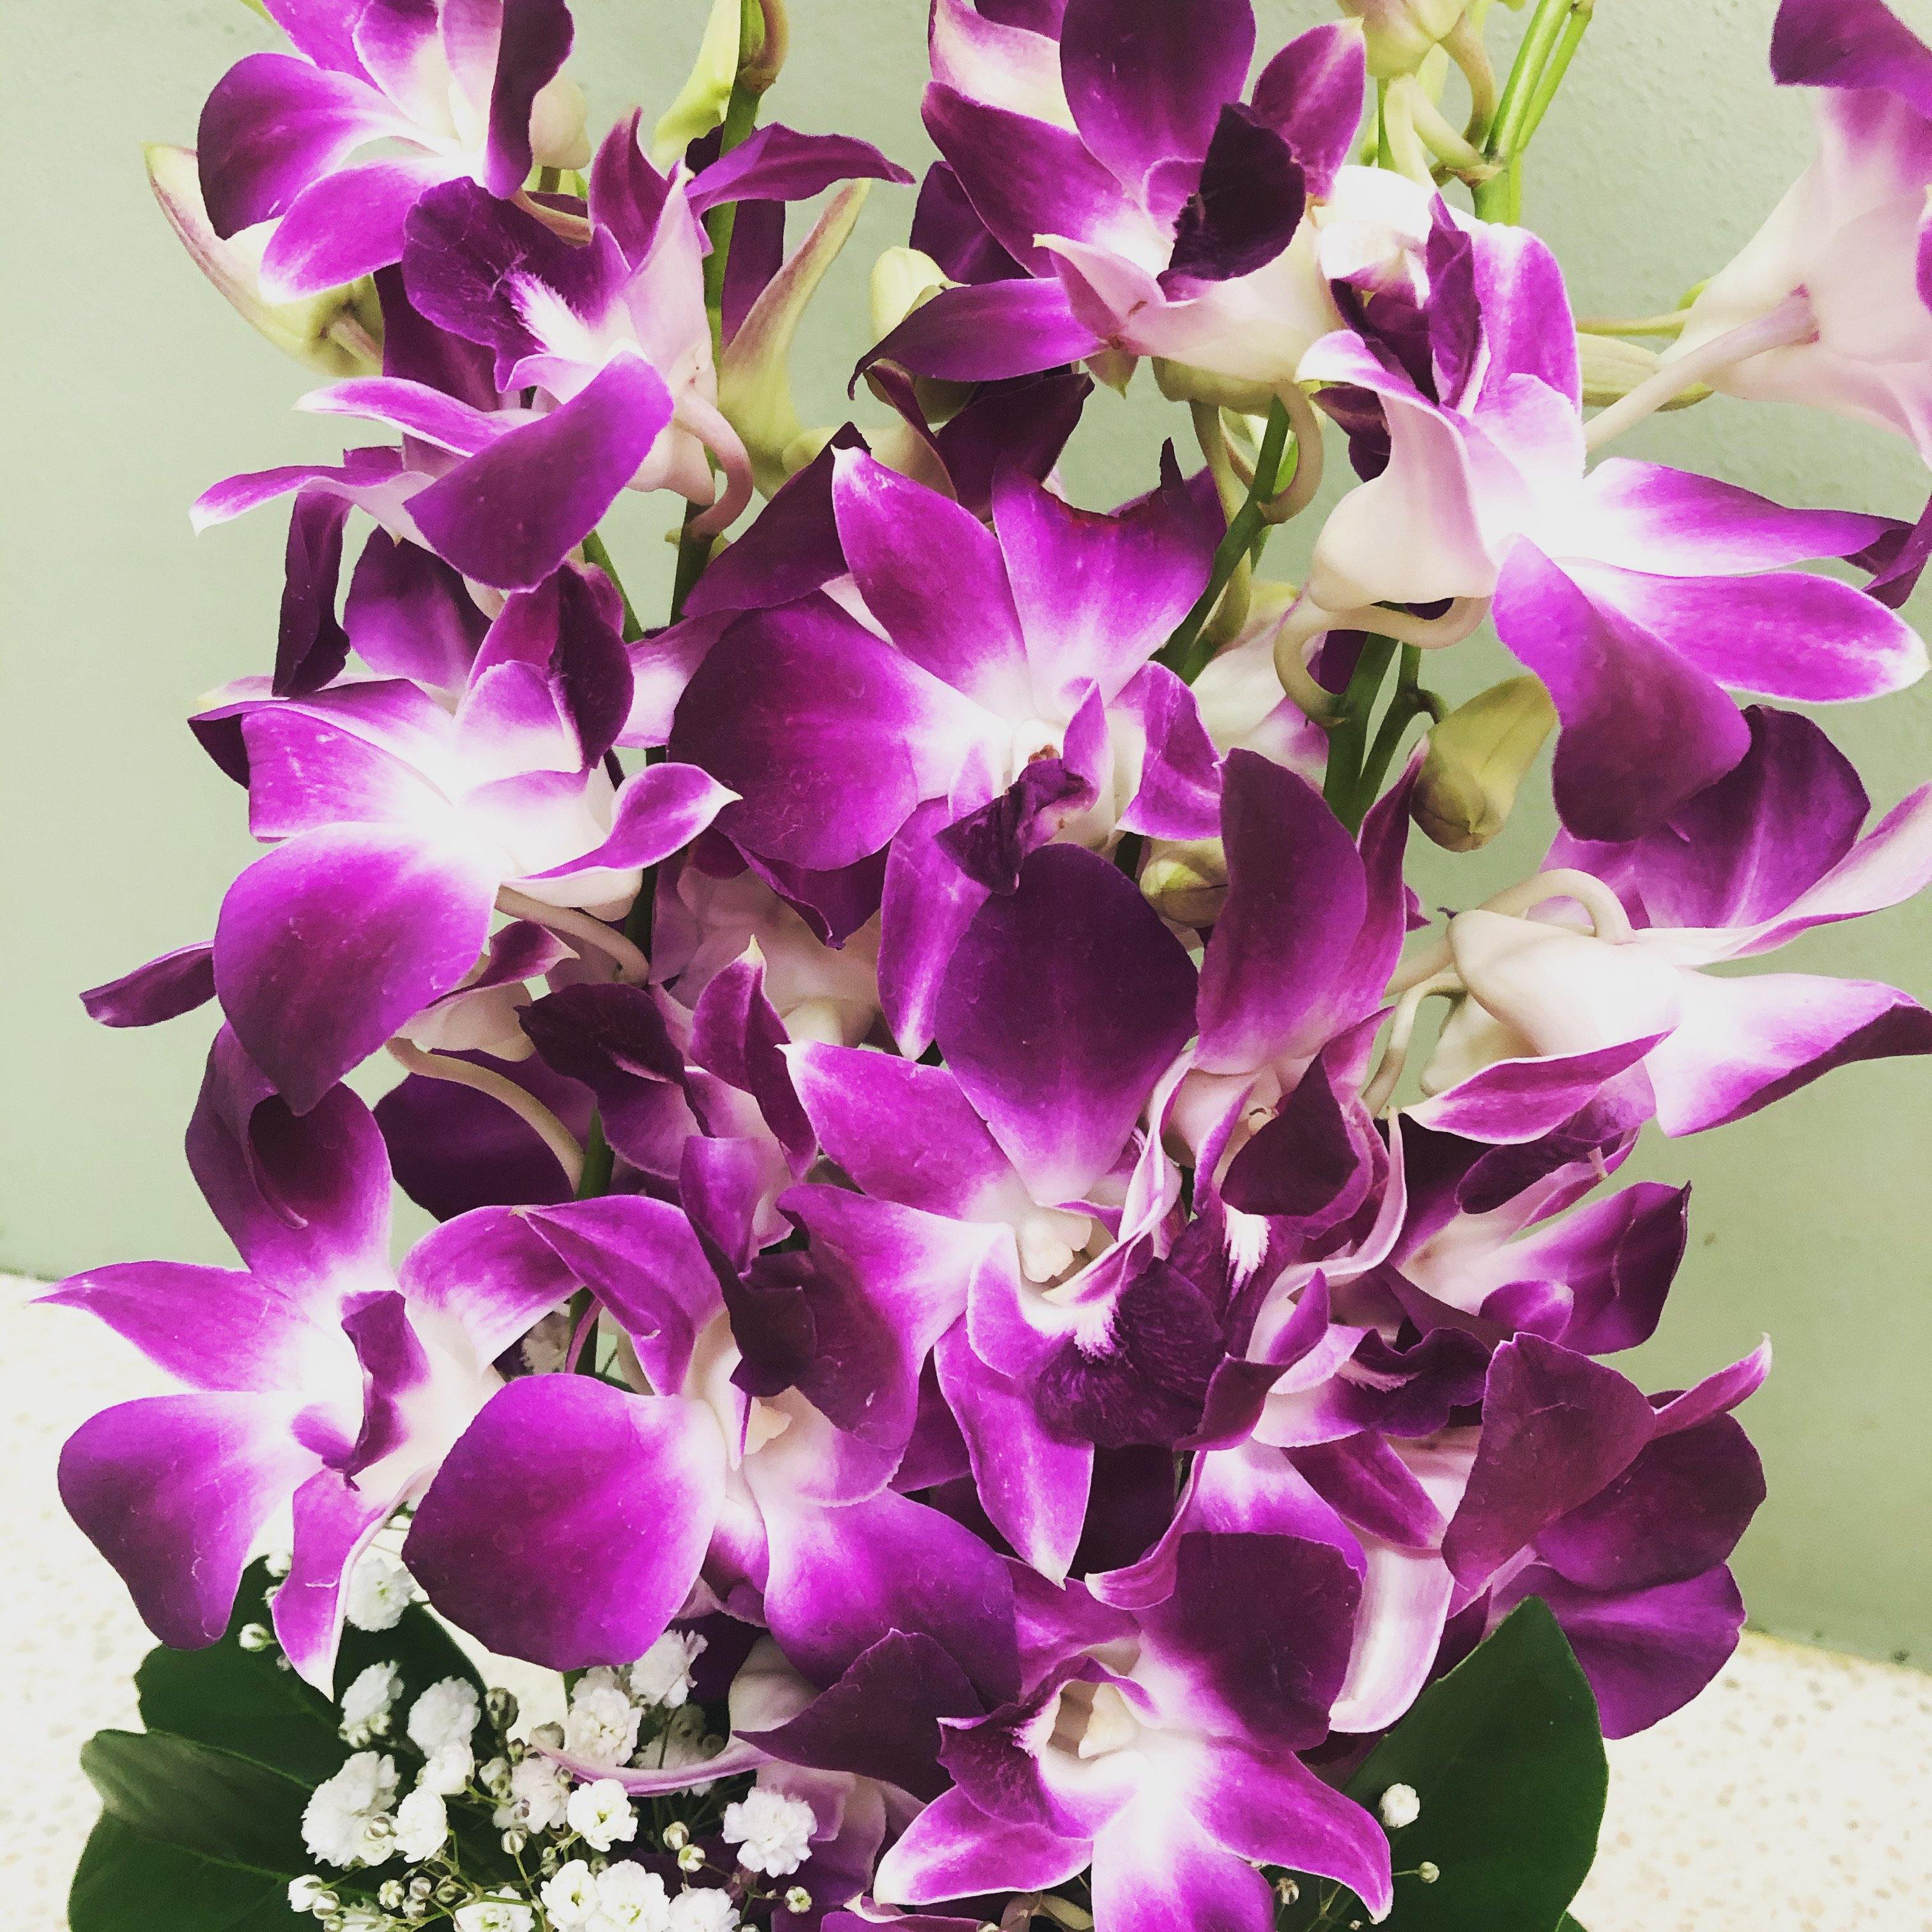 Orchid Beauty - Spring Hill Florist